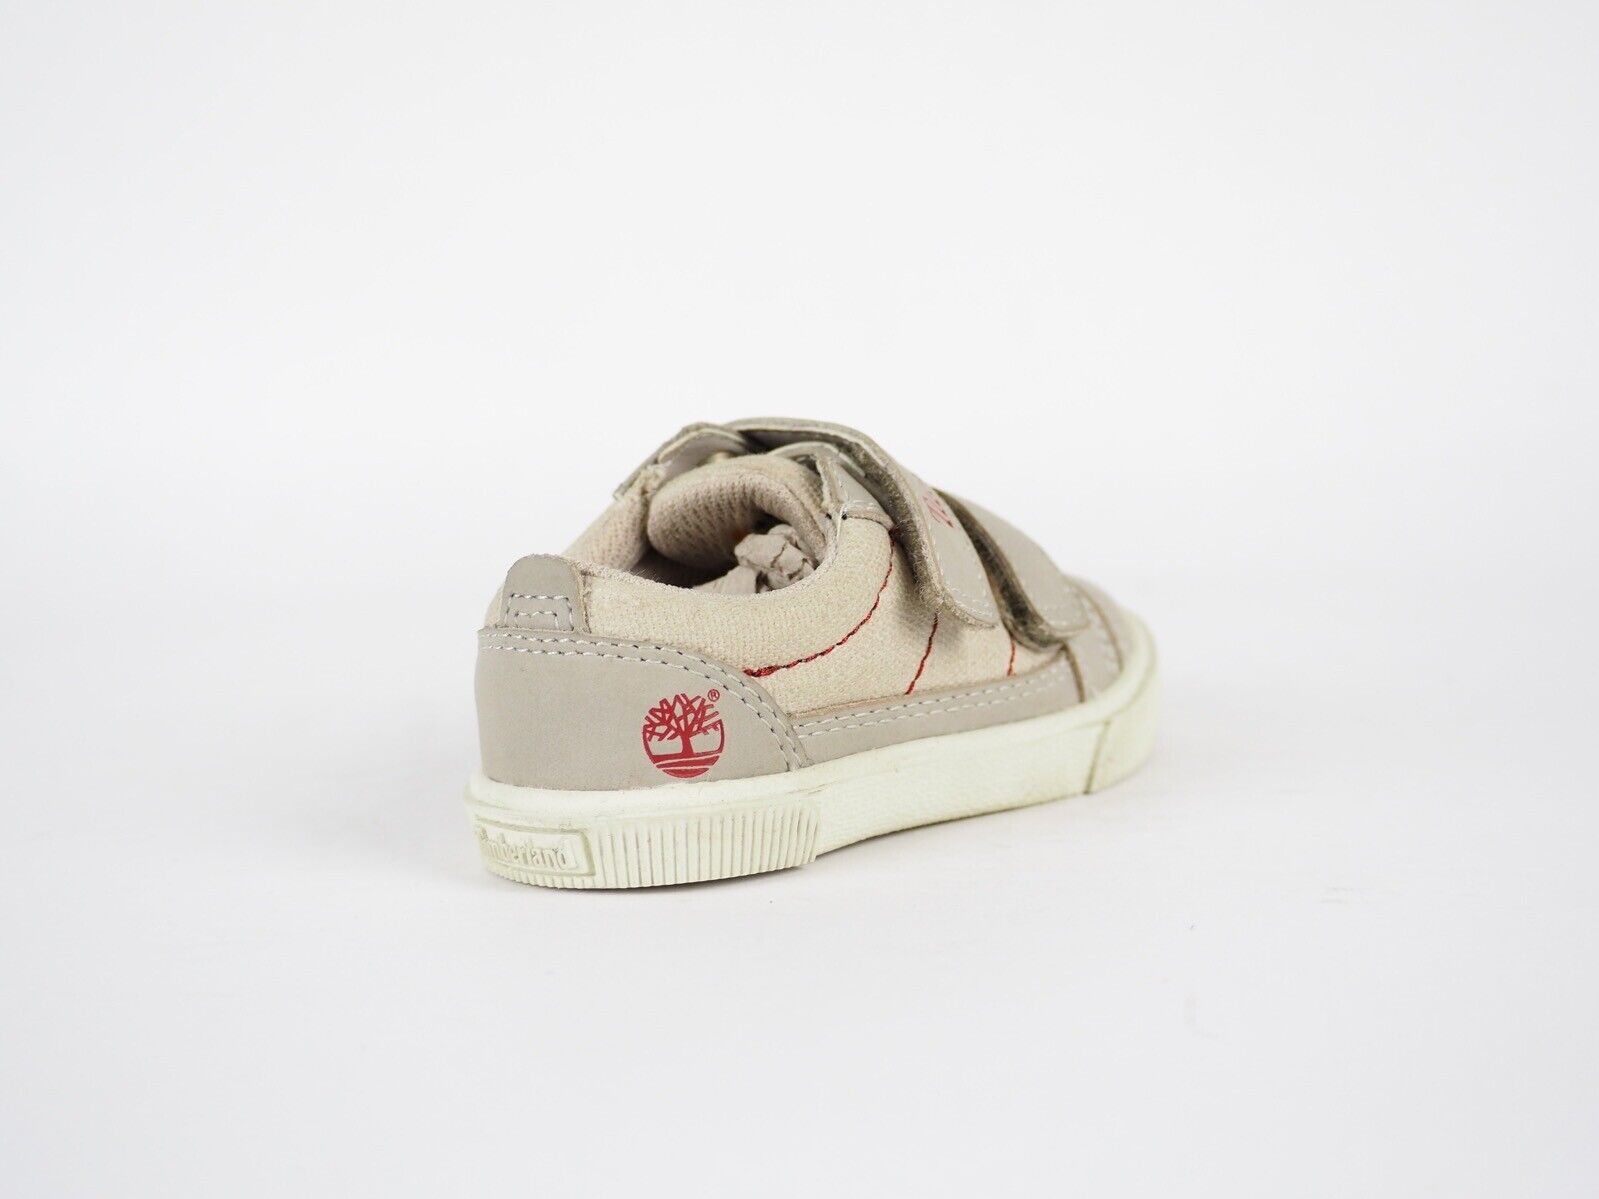 Infants Timberland Abercorn A15B9 Beige Leather Double Strap Casual Baby Shoes - London Top Style